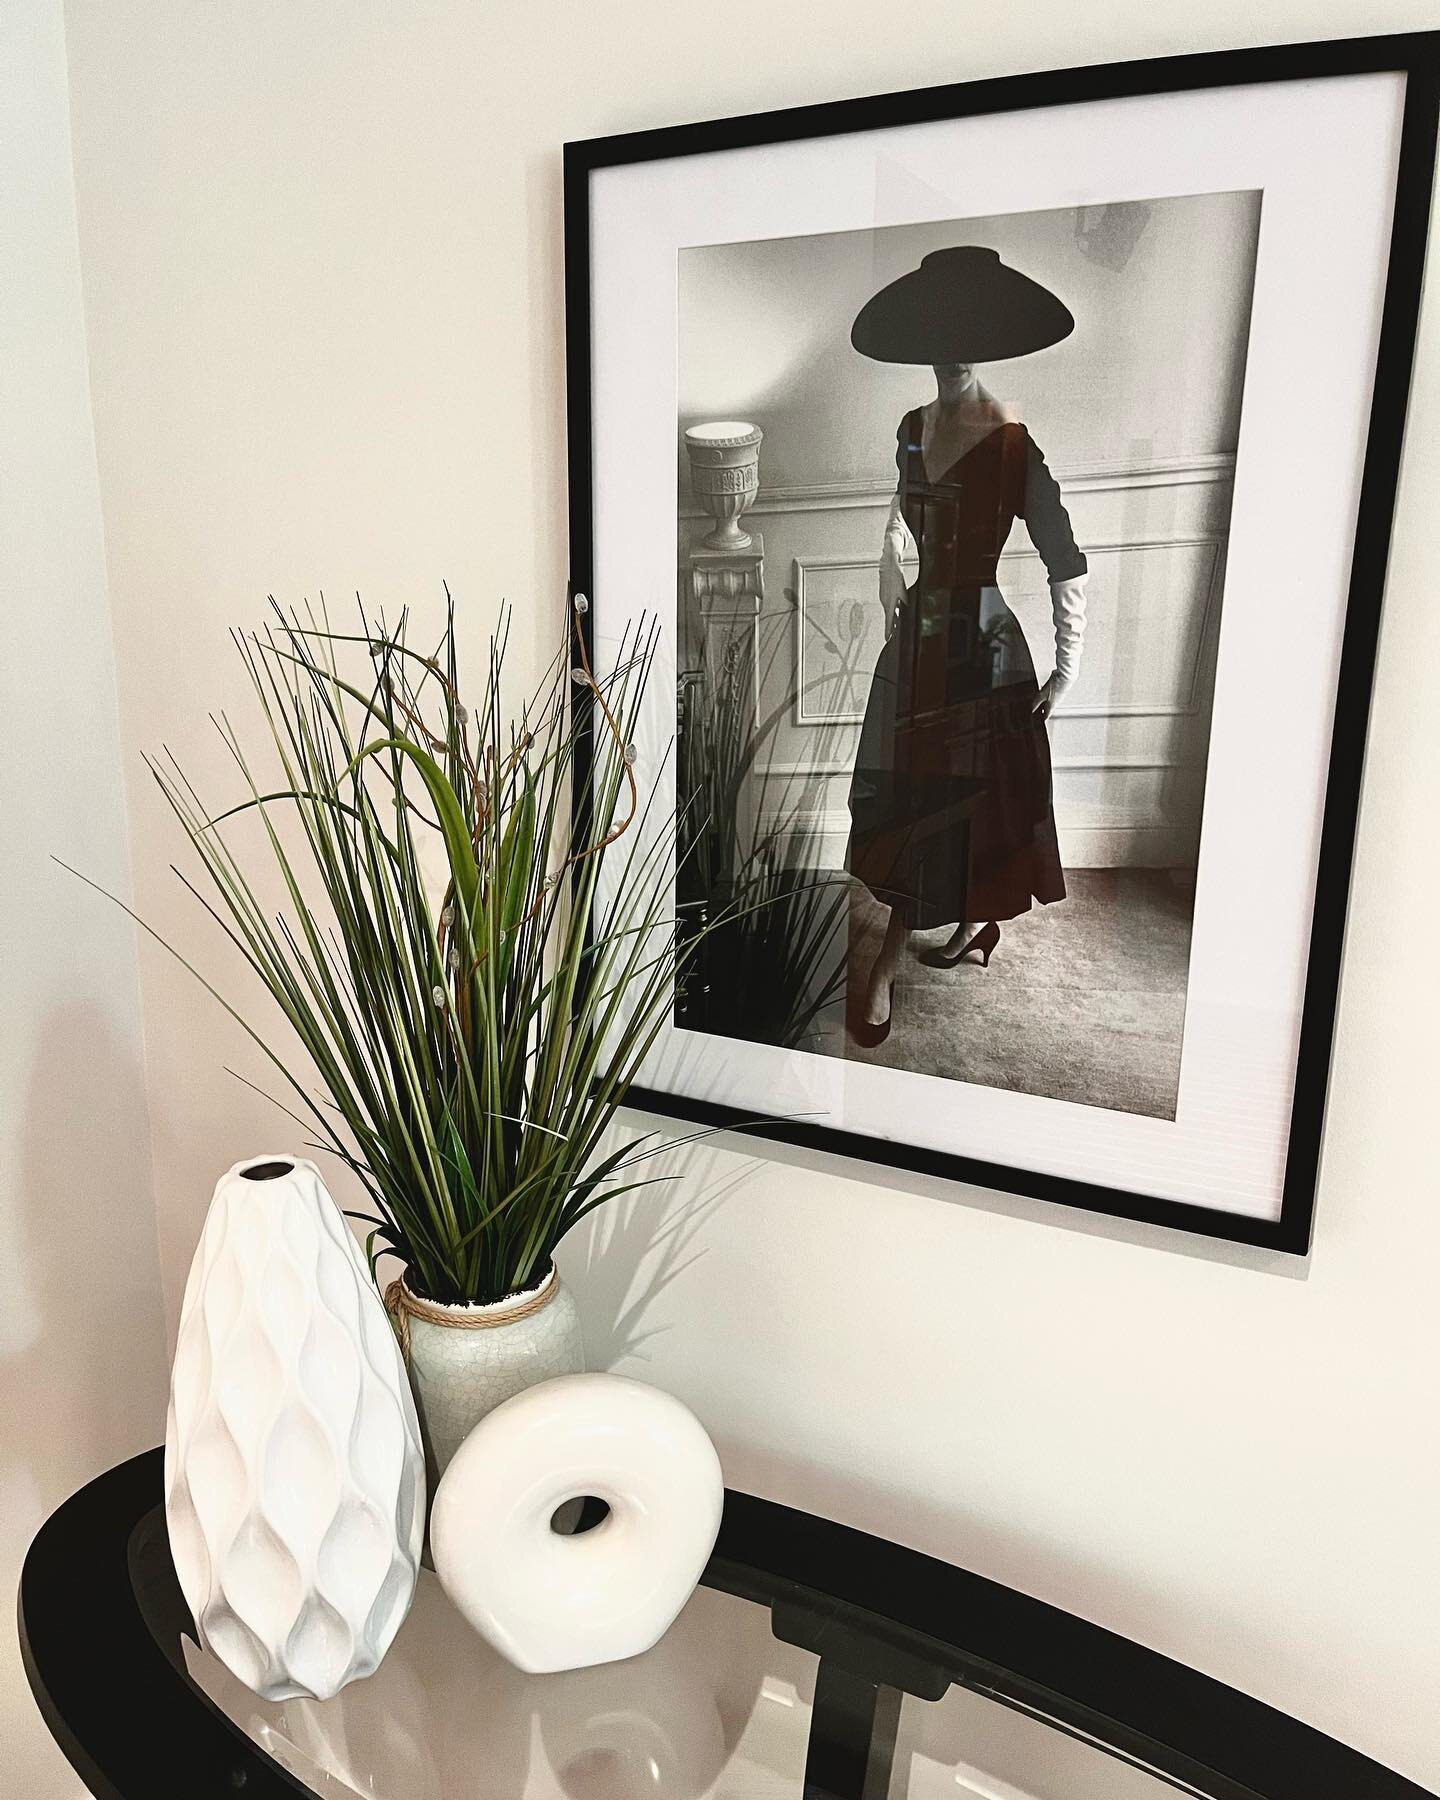 Just a few ✨details✨ from our recent home staging in Lake Forest. 

&bull;
&bull;
&bull;
&bull;
&bull;
&bull;

#stagingsells #homestagingworks #homestager #chicagolandrealestate #chicagolandrealtor 

Home staging, home stager, Chicago home, Chicagola